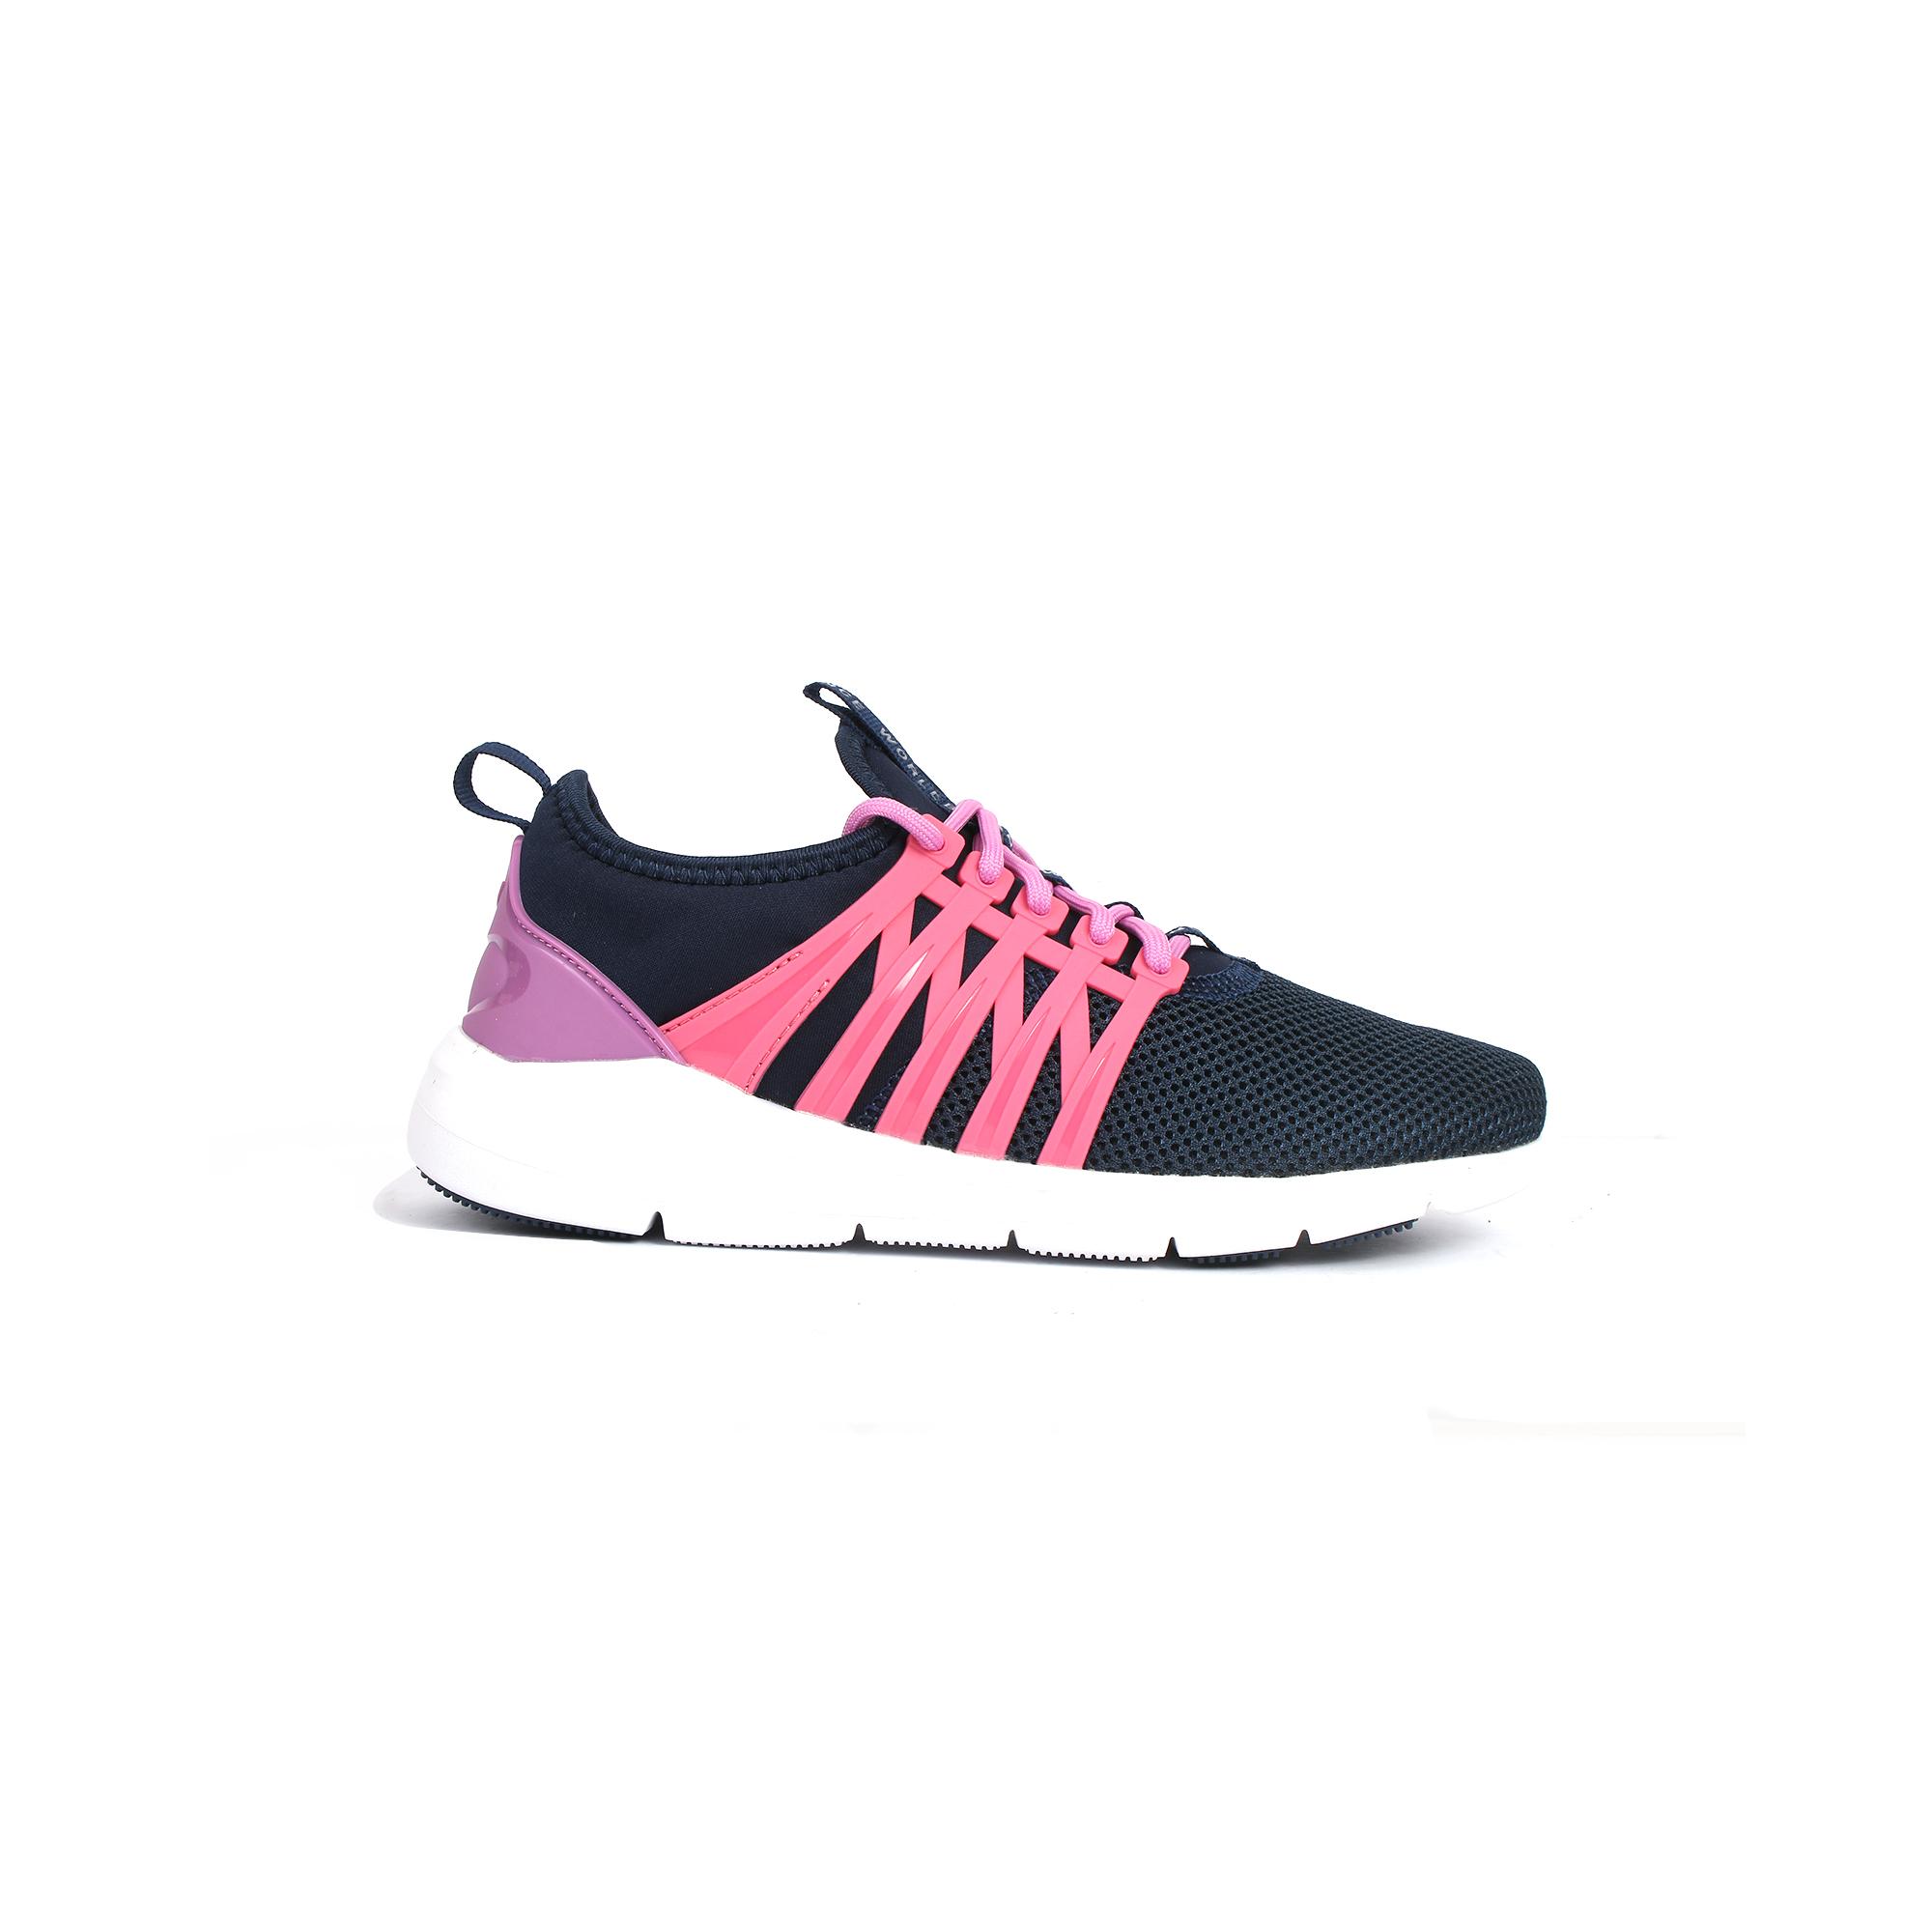 world balance running shoes for ladies